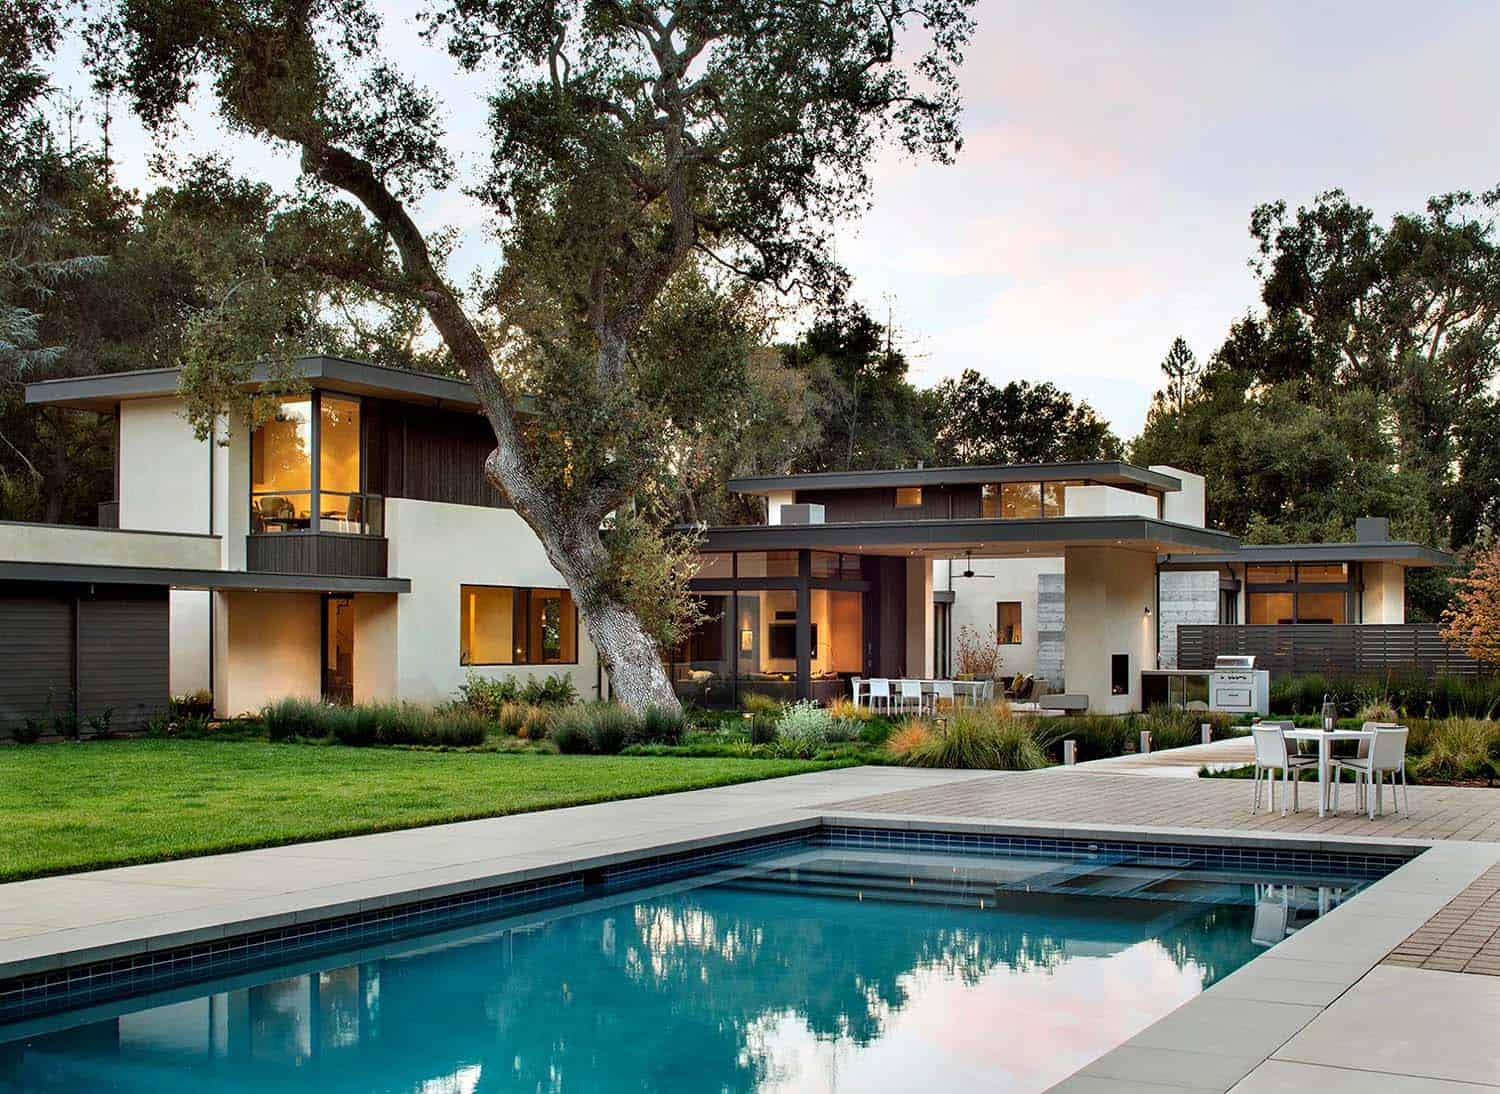 Incredible looking California dwelling filled with natural light